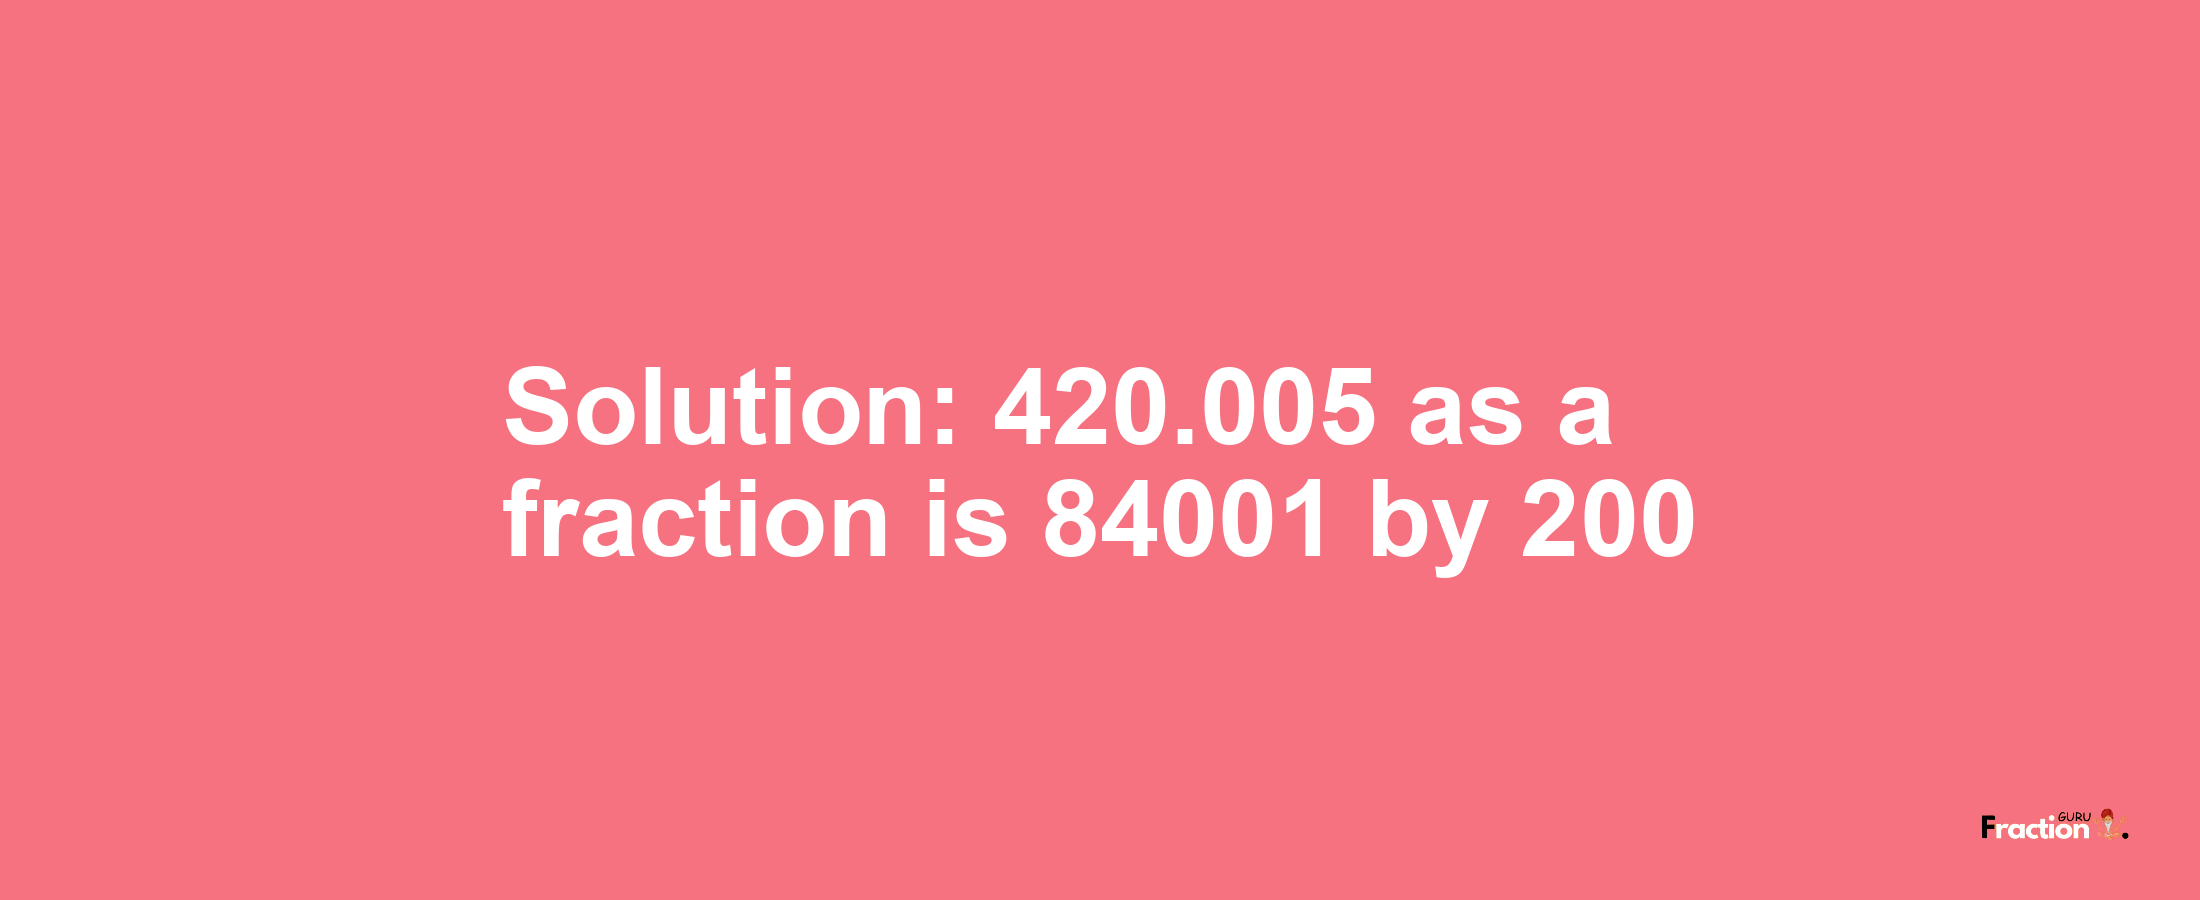 Solution:420.005 as a fraction is 84001/200